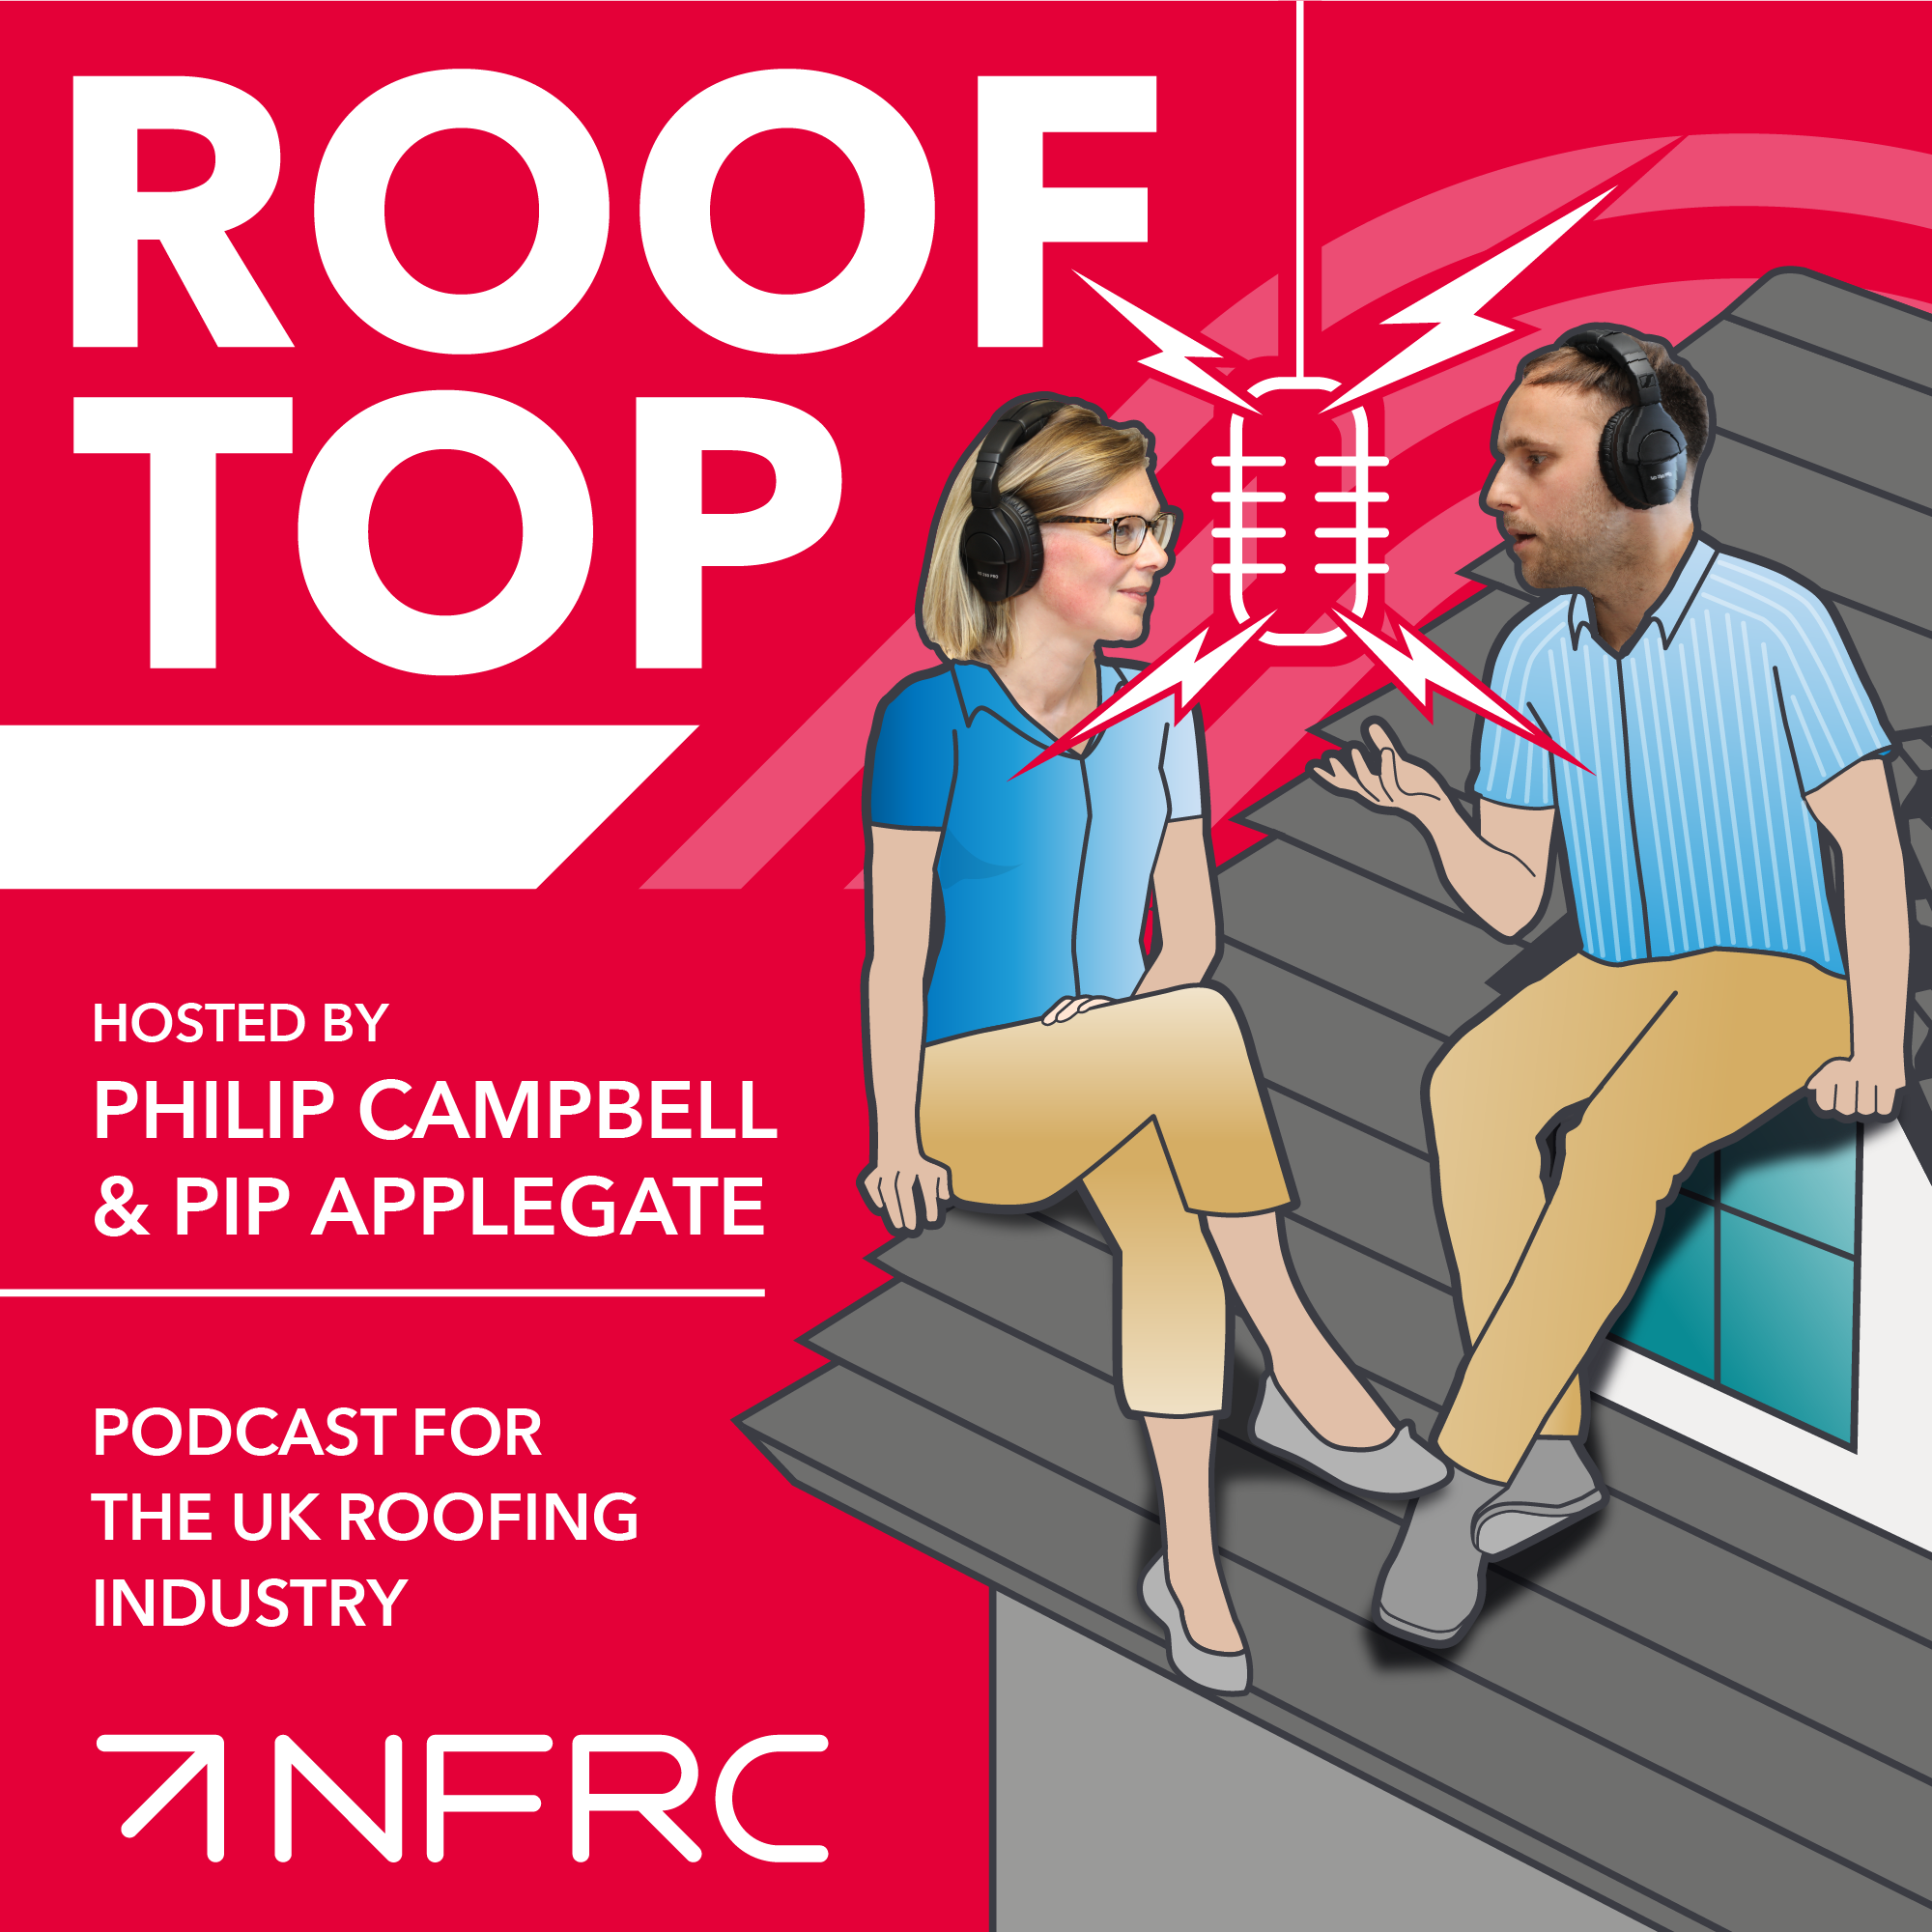 nfrc rooftop podcast for the UK roofing industry